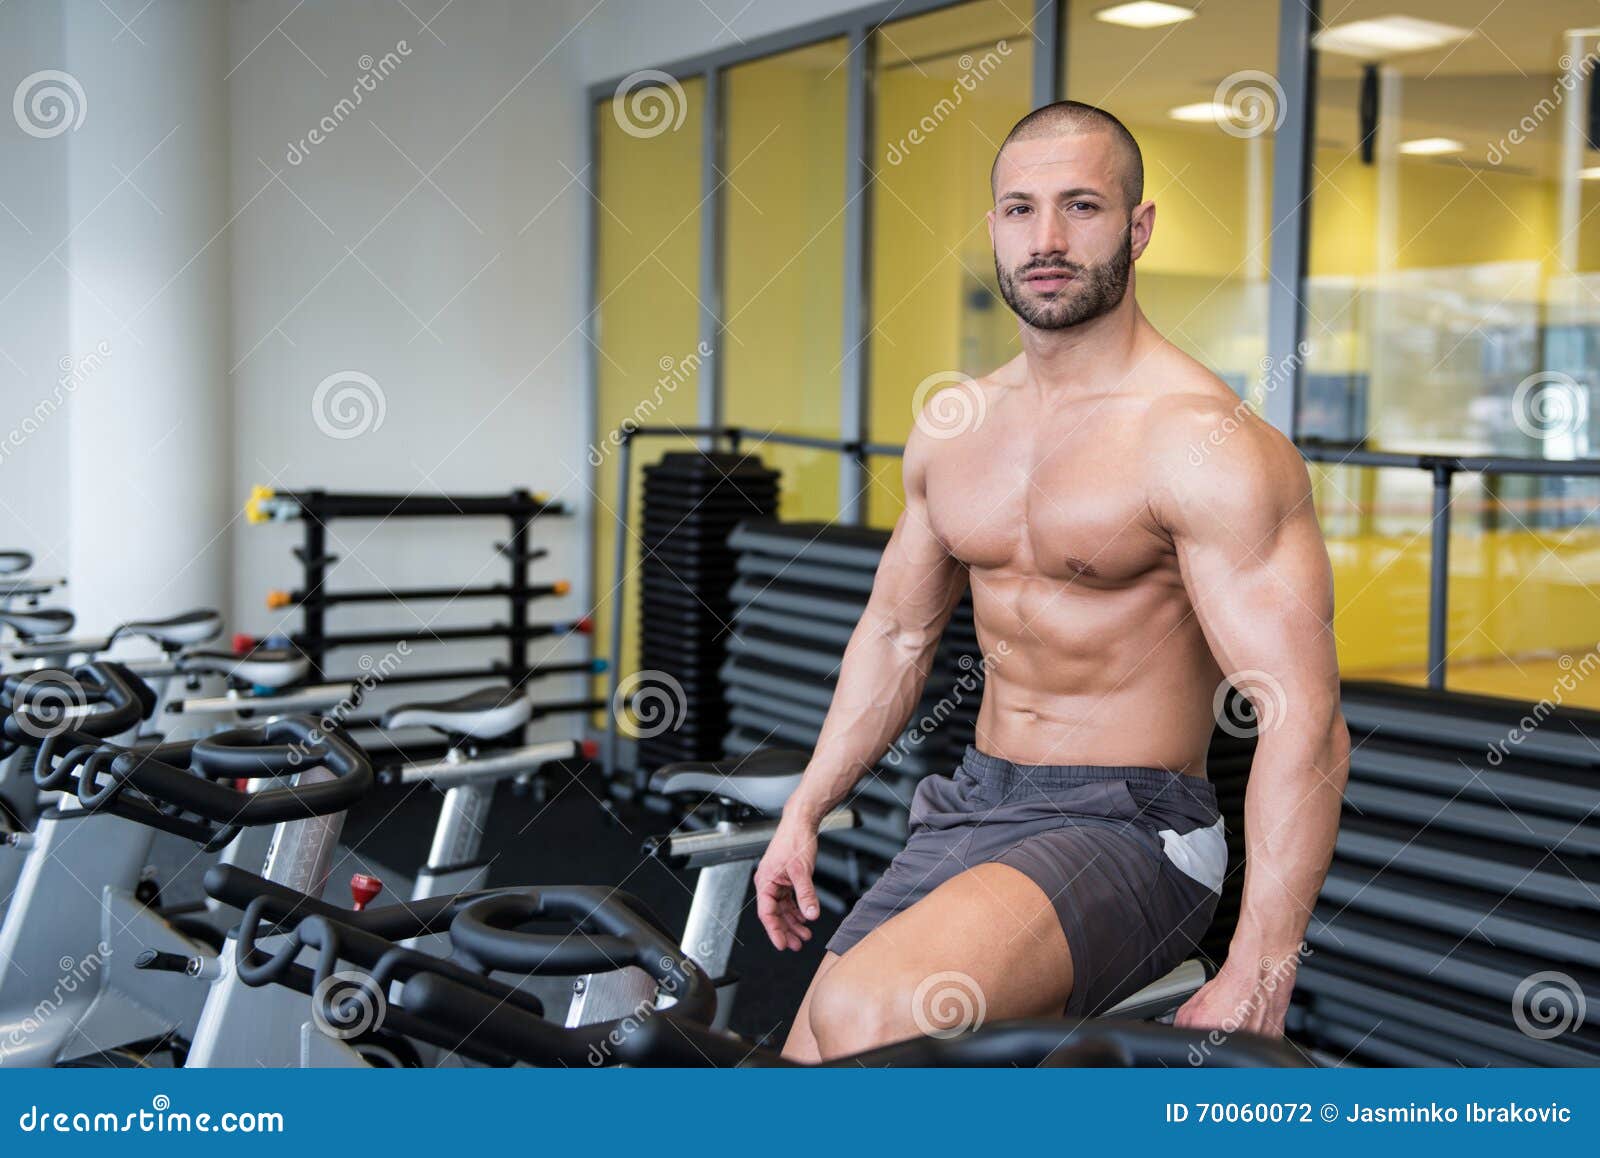 Young Man Cycling On Bike Bodybuilding Trainer Stock Photo Image regarding Cycling And Bodybuilding